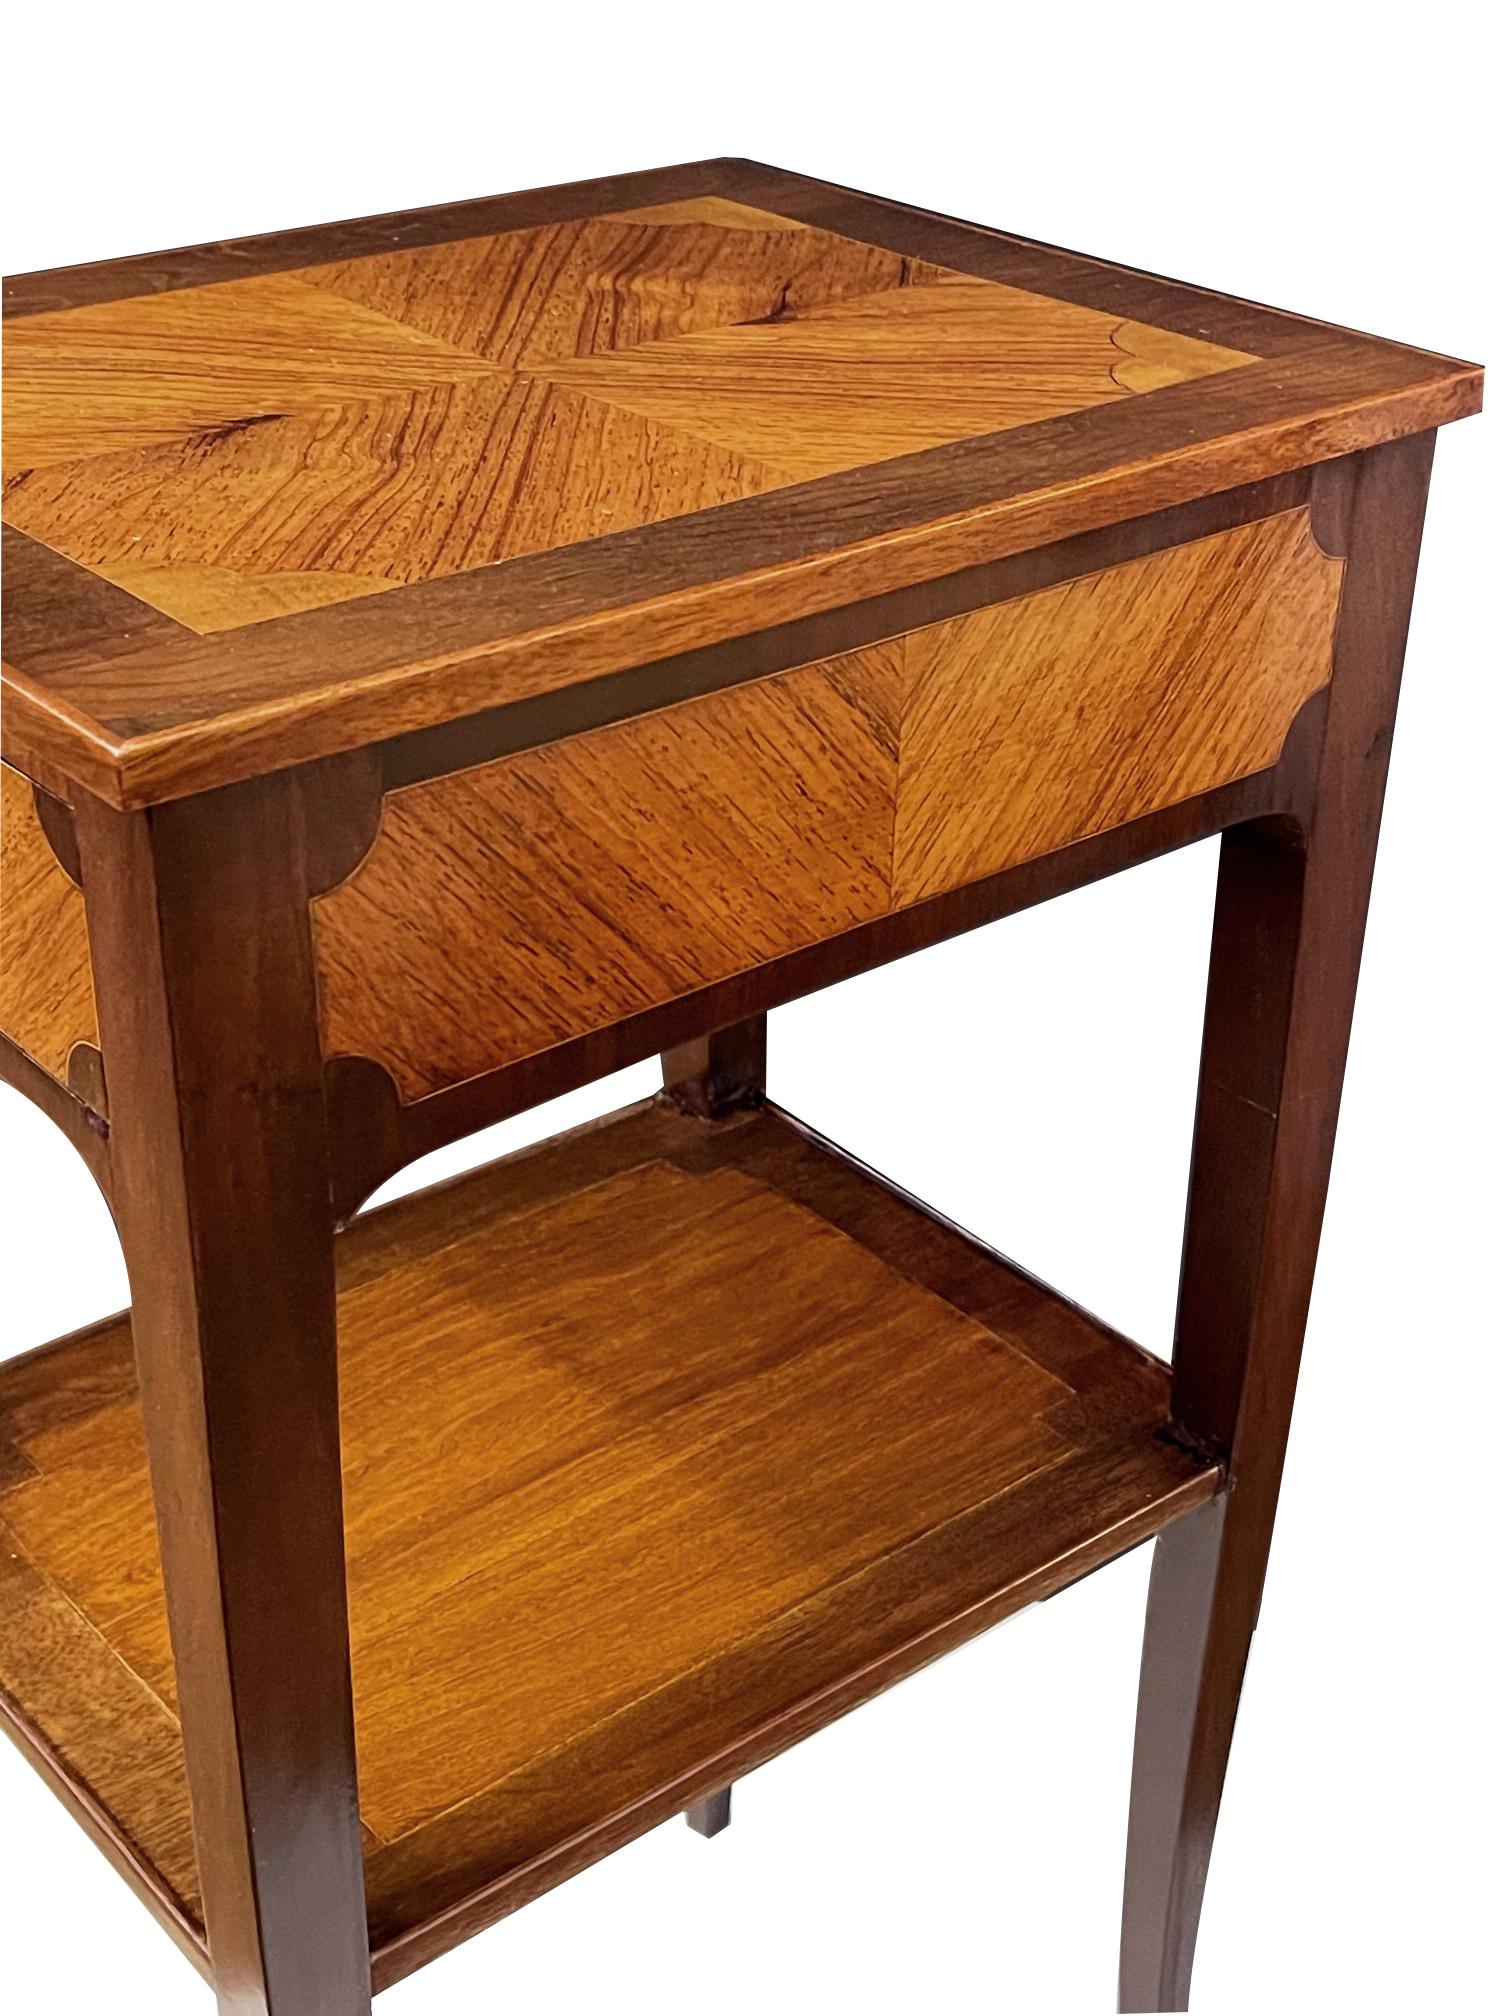 The rectangular top centering bookmatched Kingwood veneer within a walnut border; over a conforming apron fitted with a single drawer with similar veneer all raised on graceful splayed legs joined by a lower shelf.